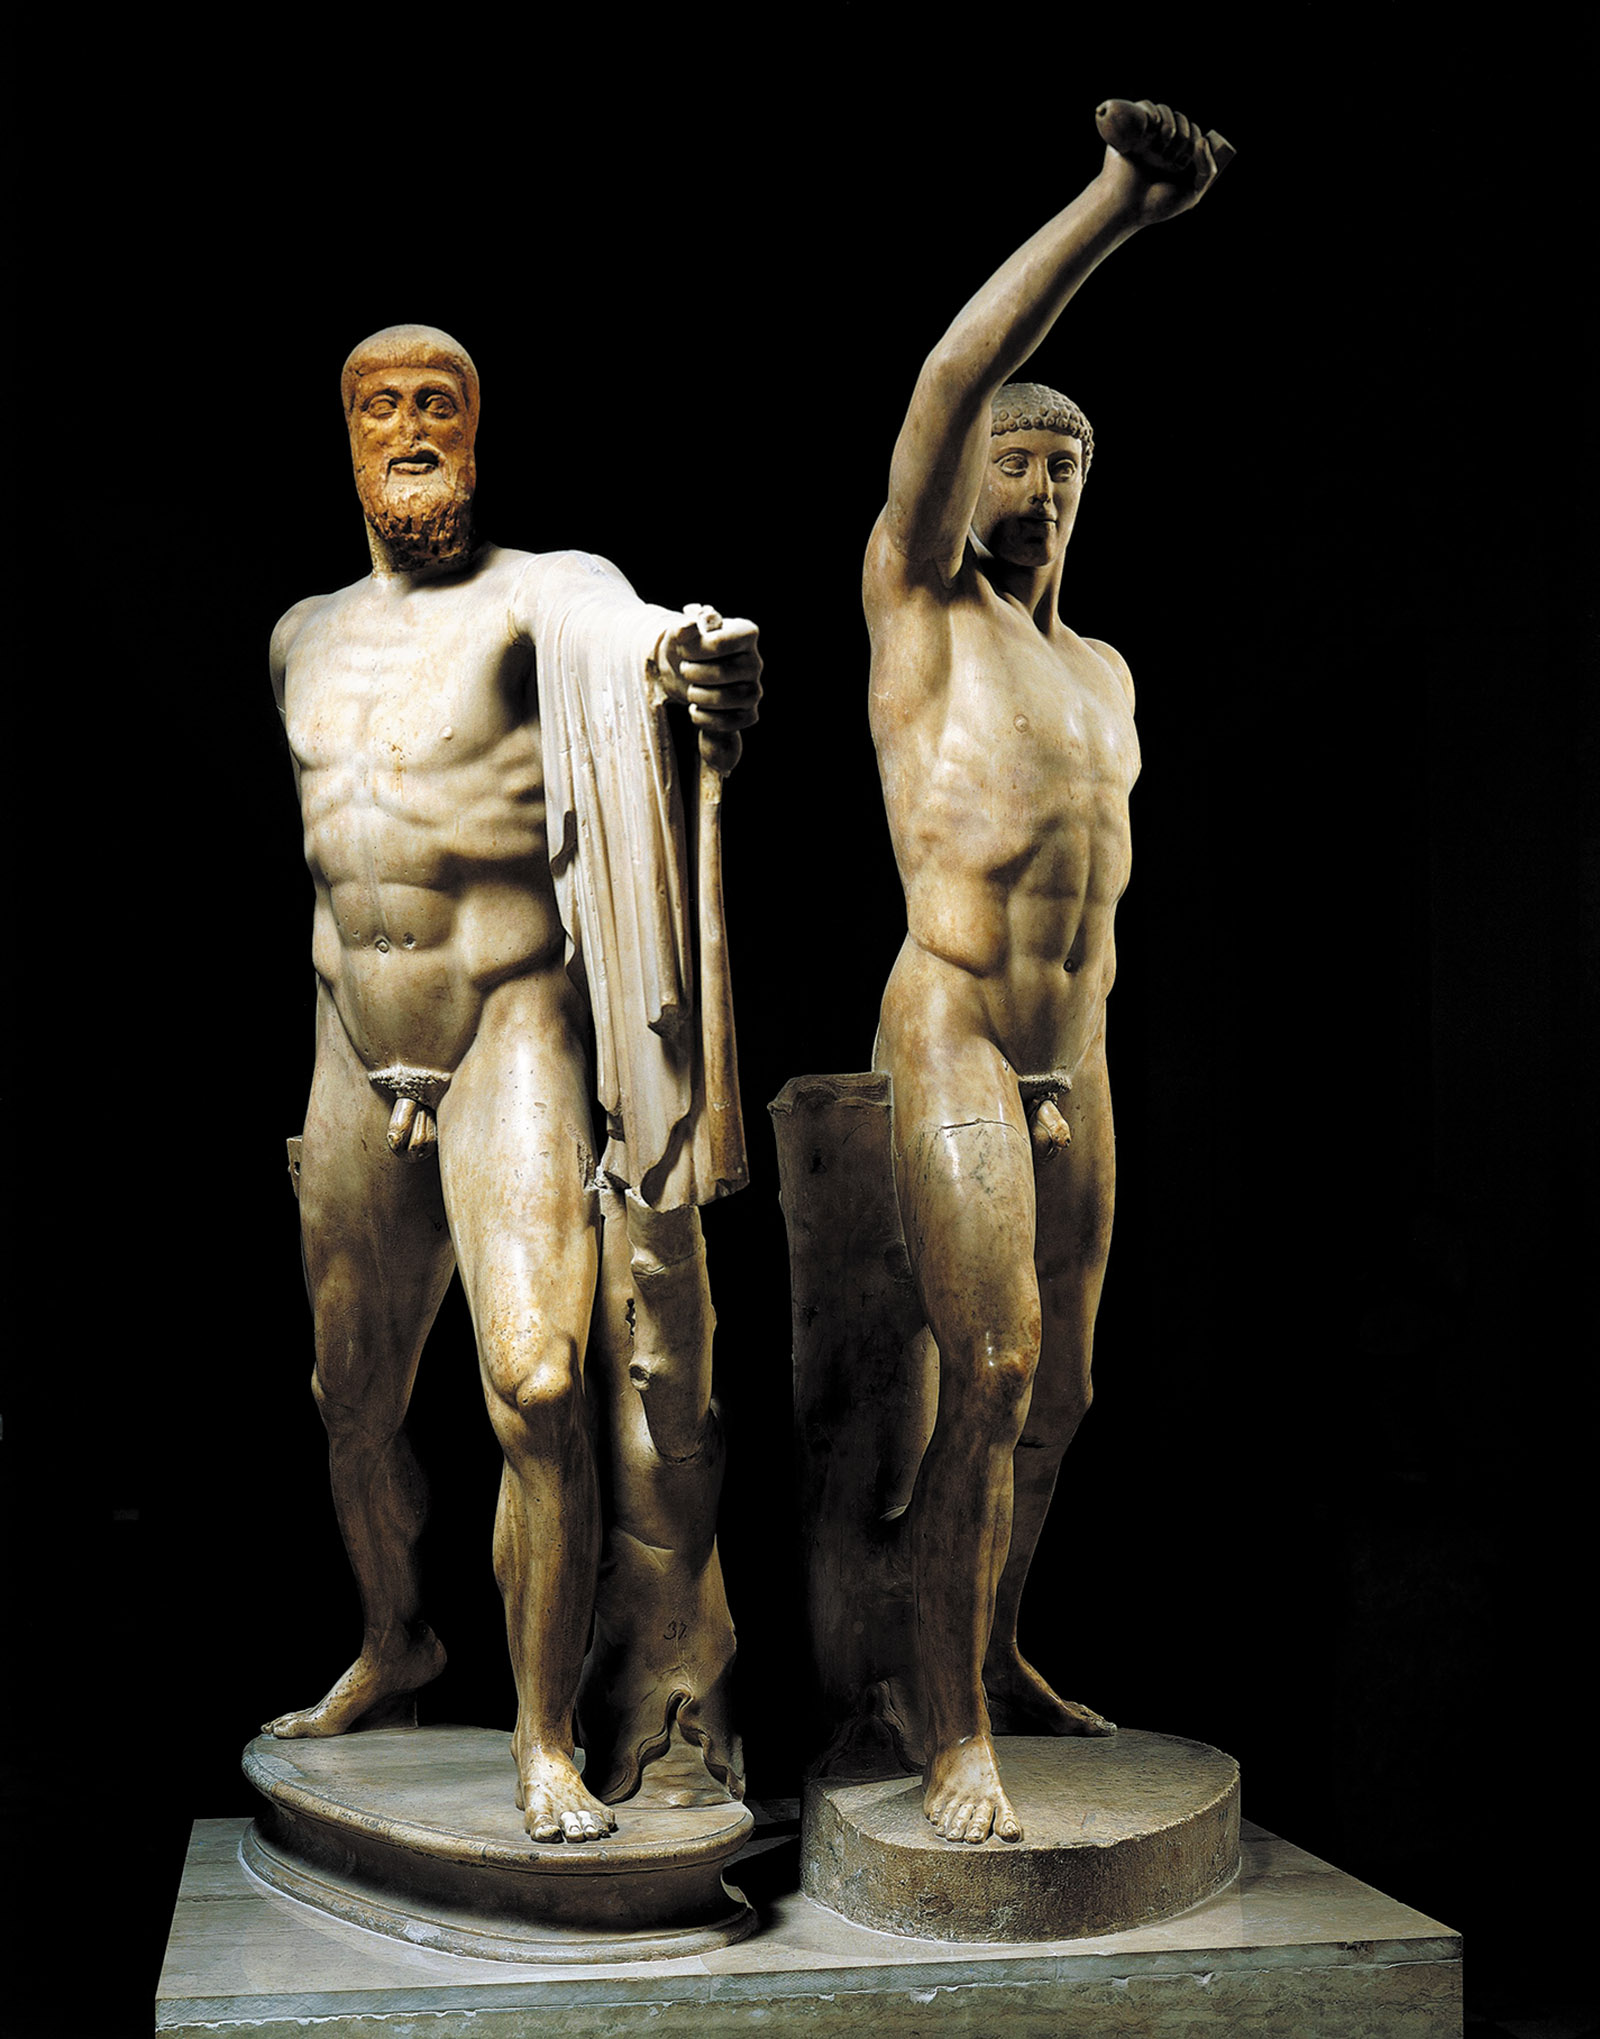 Aristogiton and Harmodius, Roman copies in marble after Greek bronze statues, circa fifth century BC